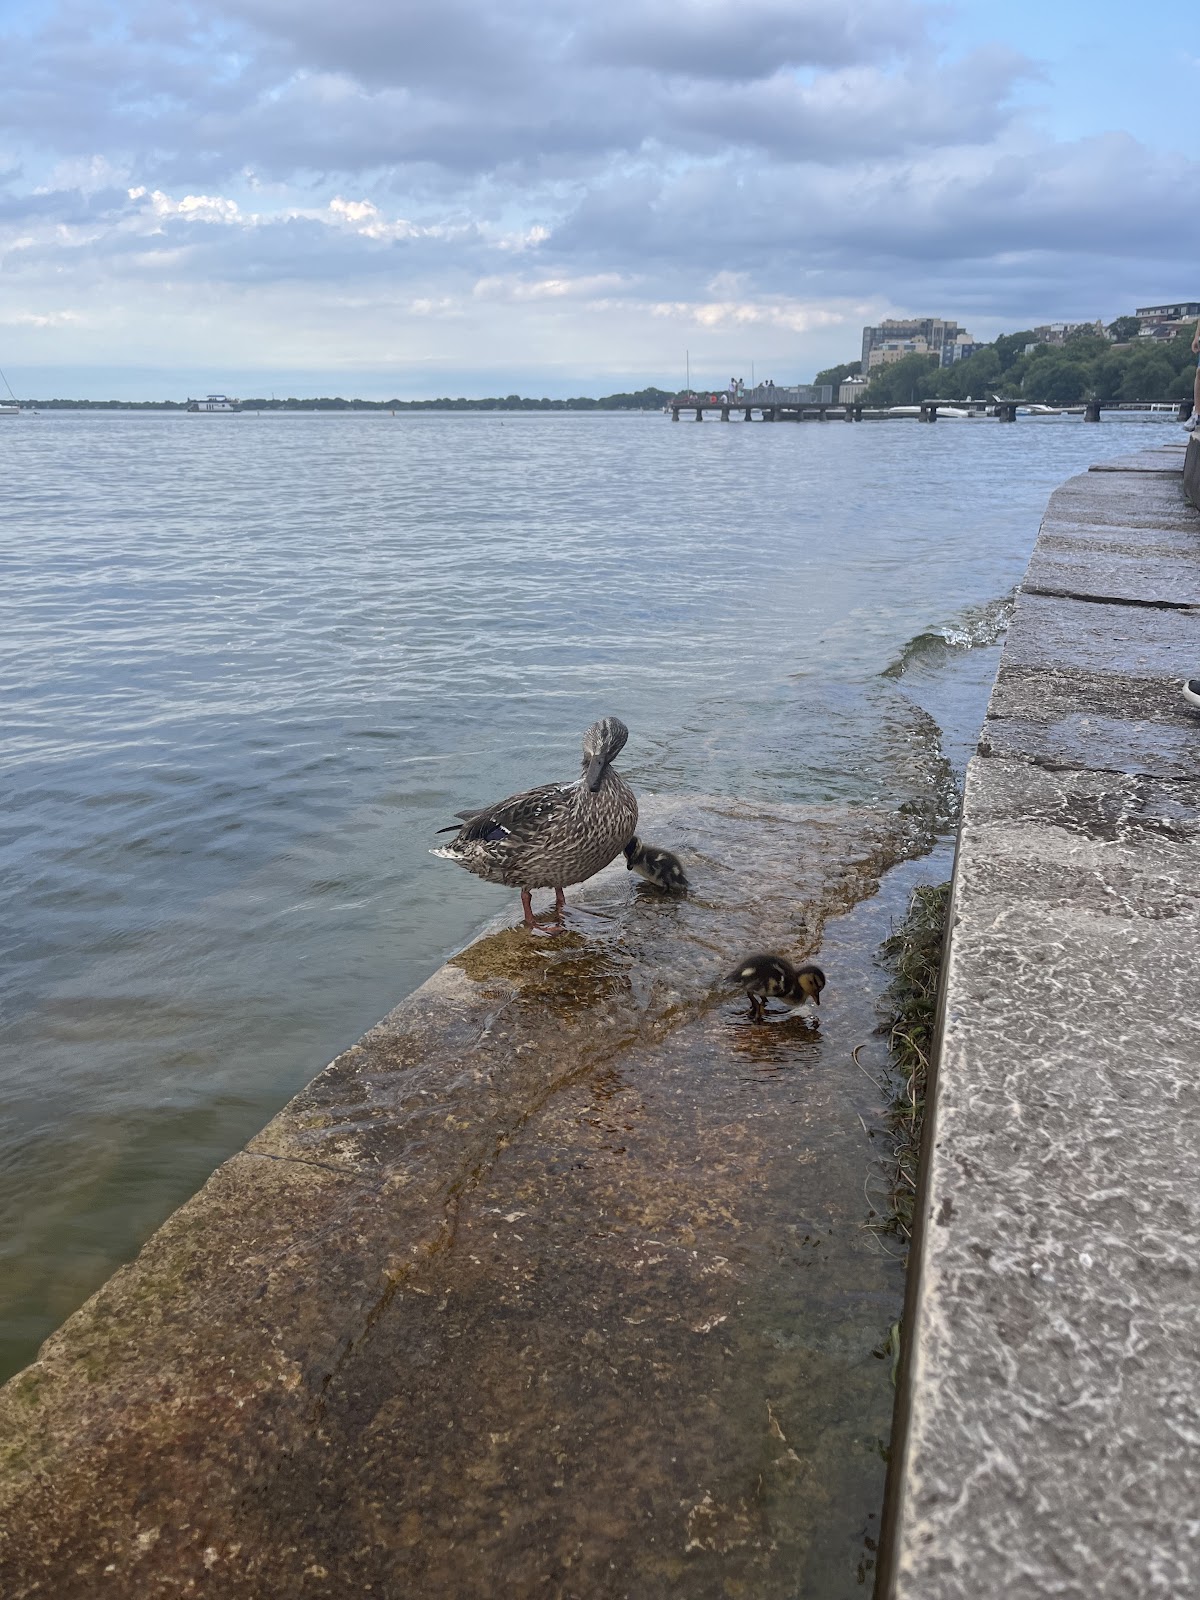 A mother duck and two little duckies at Lake Mendota, Madison, WI.